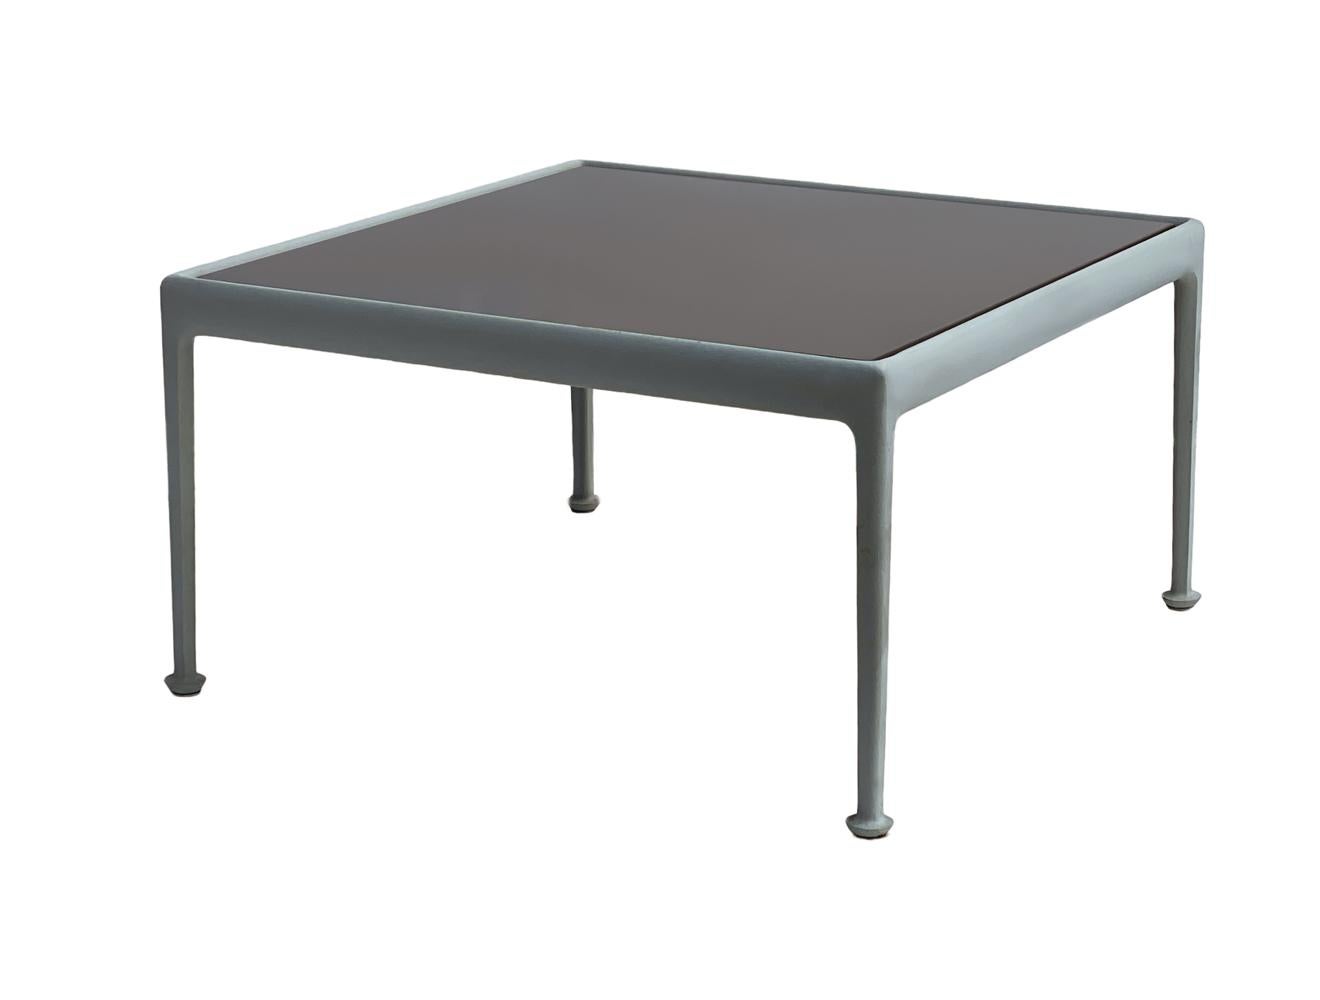 American Mid-Century Modern 1966 Richard Schultz for Knoll Square Patio Coffee Table For Sale